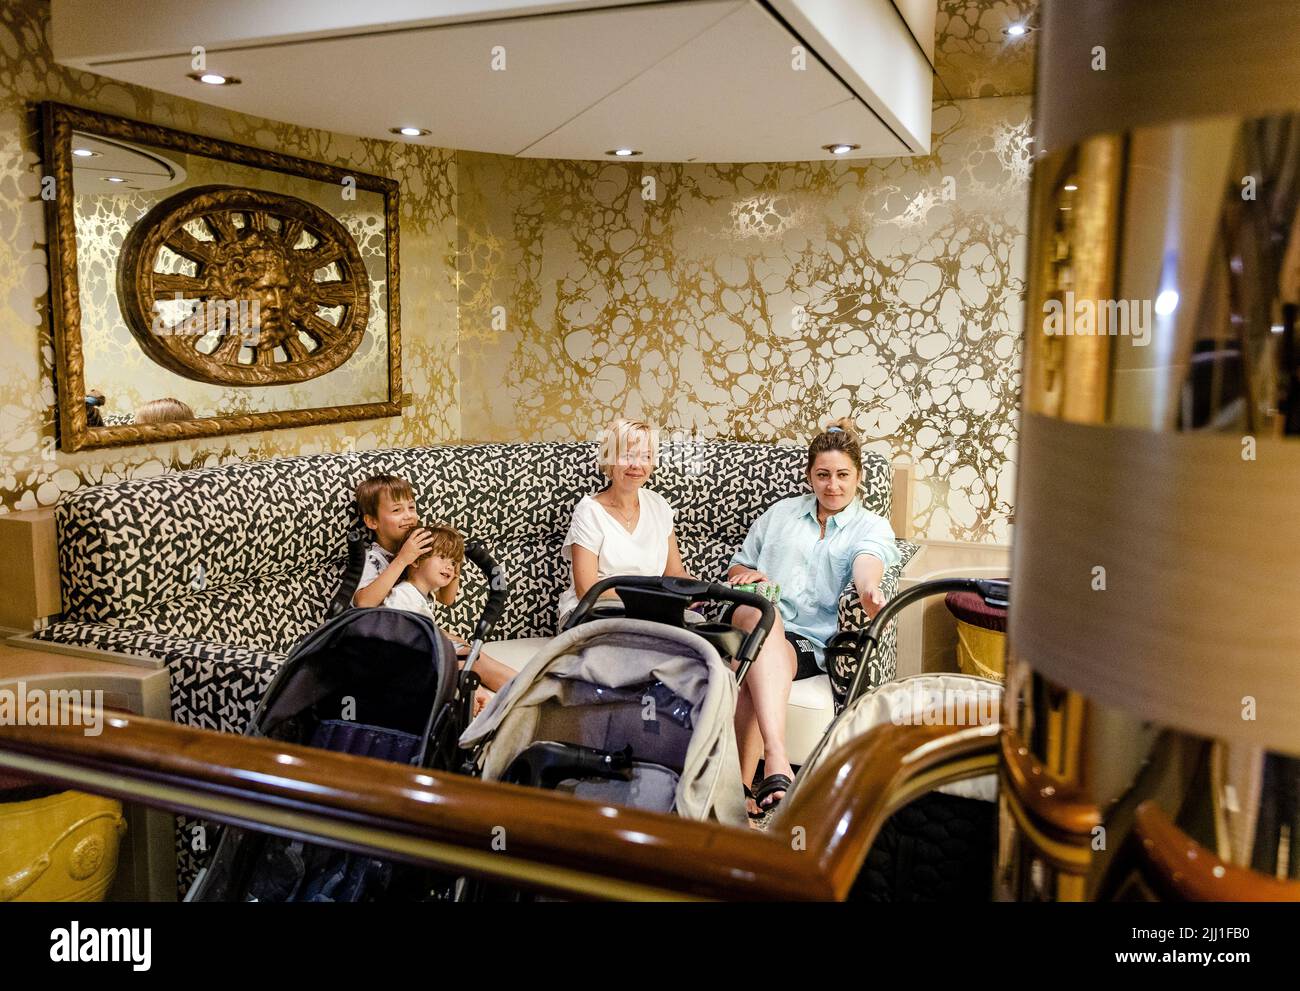 2022-07-22 11:49:28 ROTTERDAM - Refugees aboard the Holland America Line cruise ship Volendam in the Merwehaven. Since April, the ship has temporarily accommodated 1200 Ukrainians. ANP SEM VAN DER WAL netherlands out - belgium out Credit: ANP/Alamy Live News Stock Photo